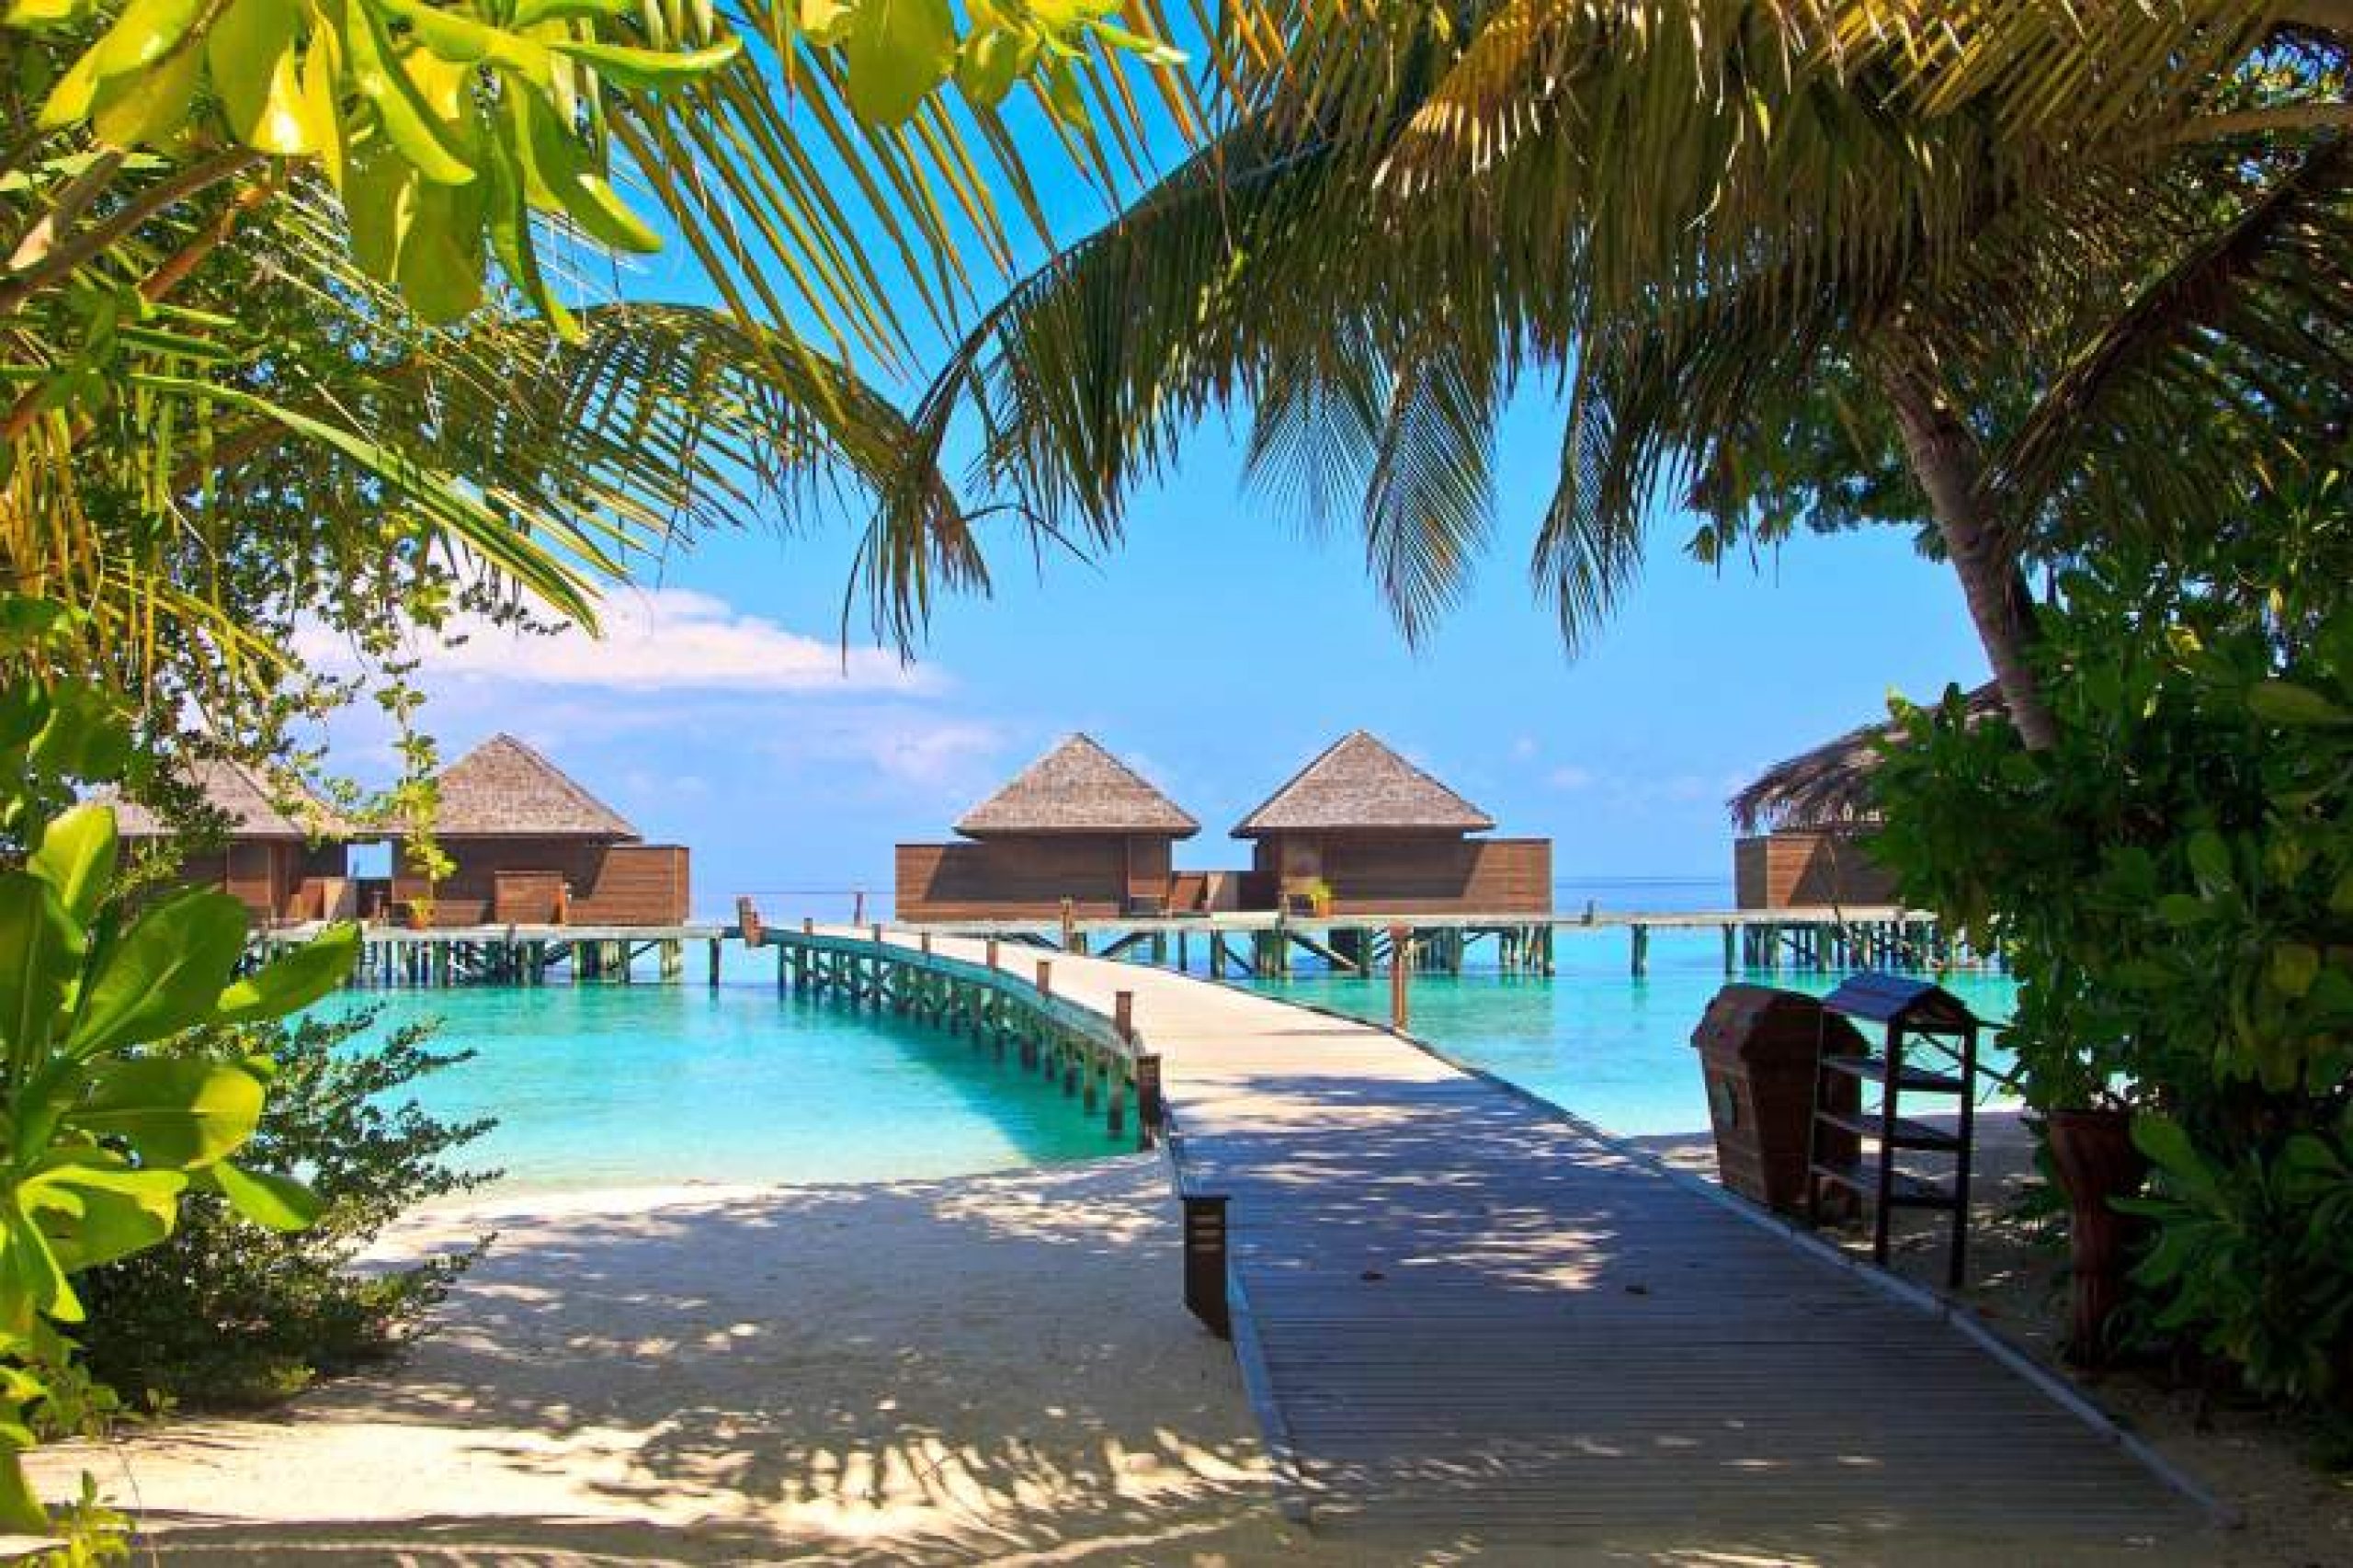 Maldives Tour Packages at Best Prices